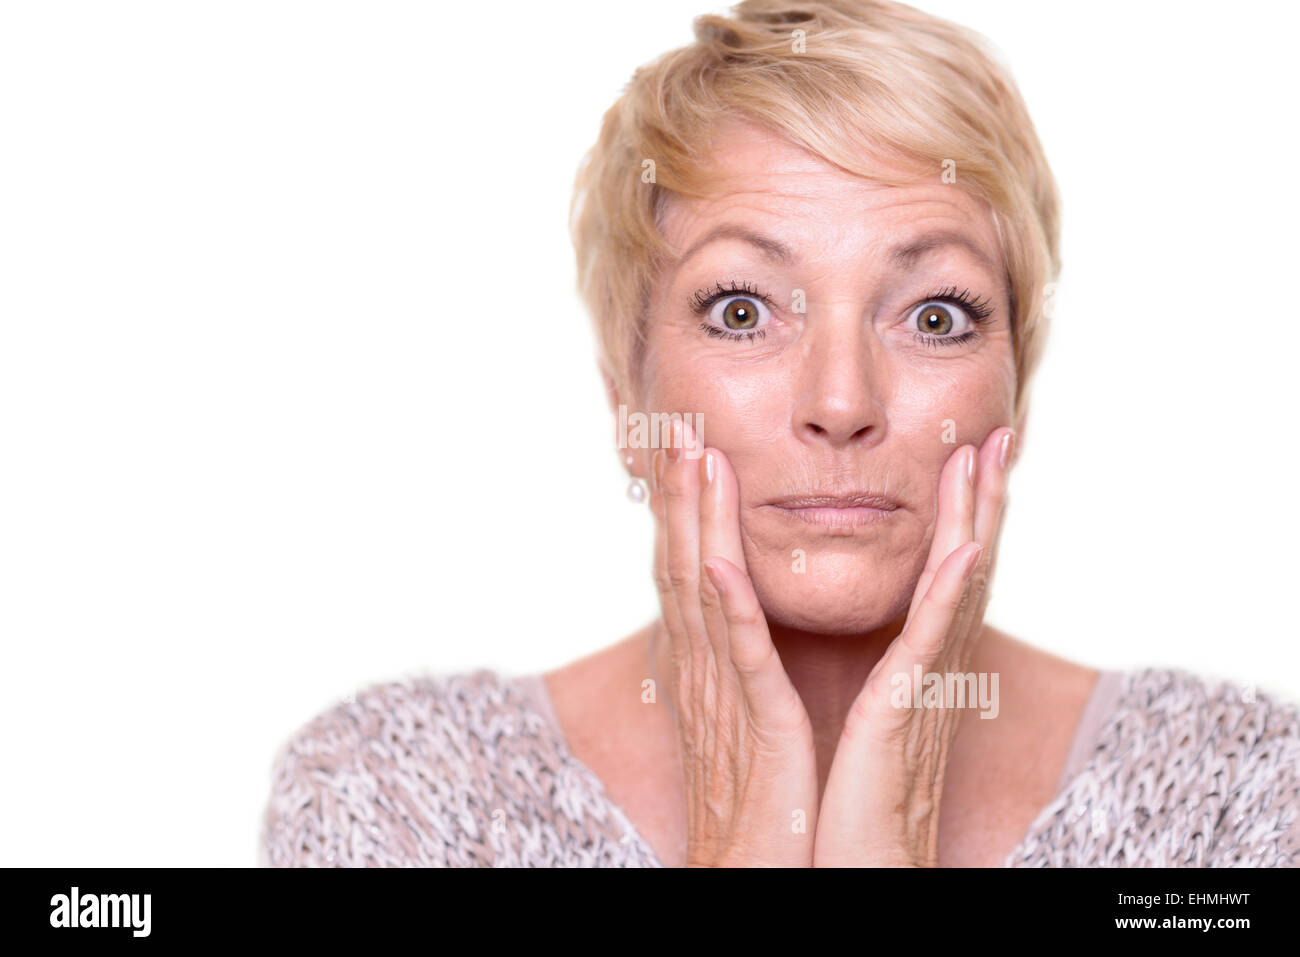 Attractive senior blond woman with a wide-eyed expression and her glasses on her head checking her complexion Stock Photo